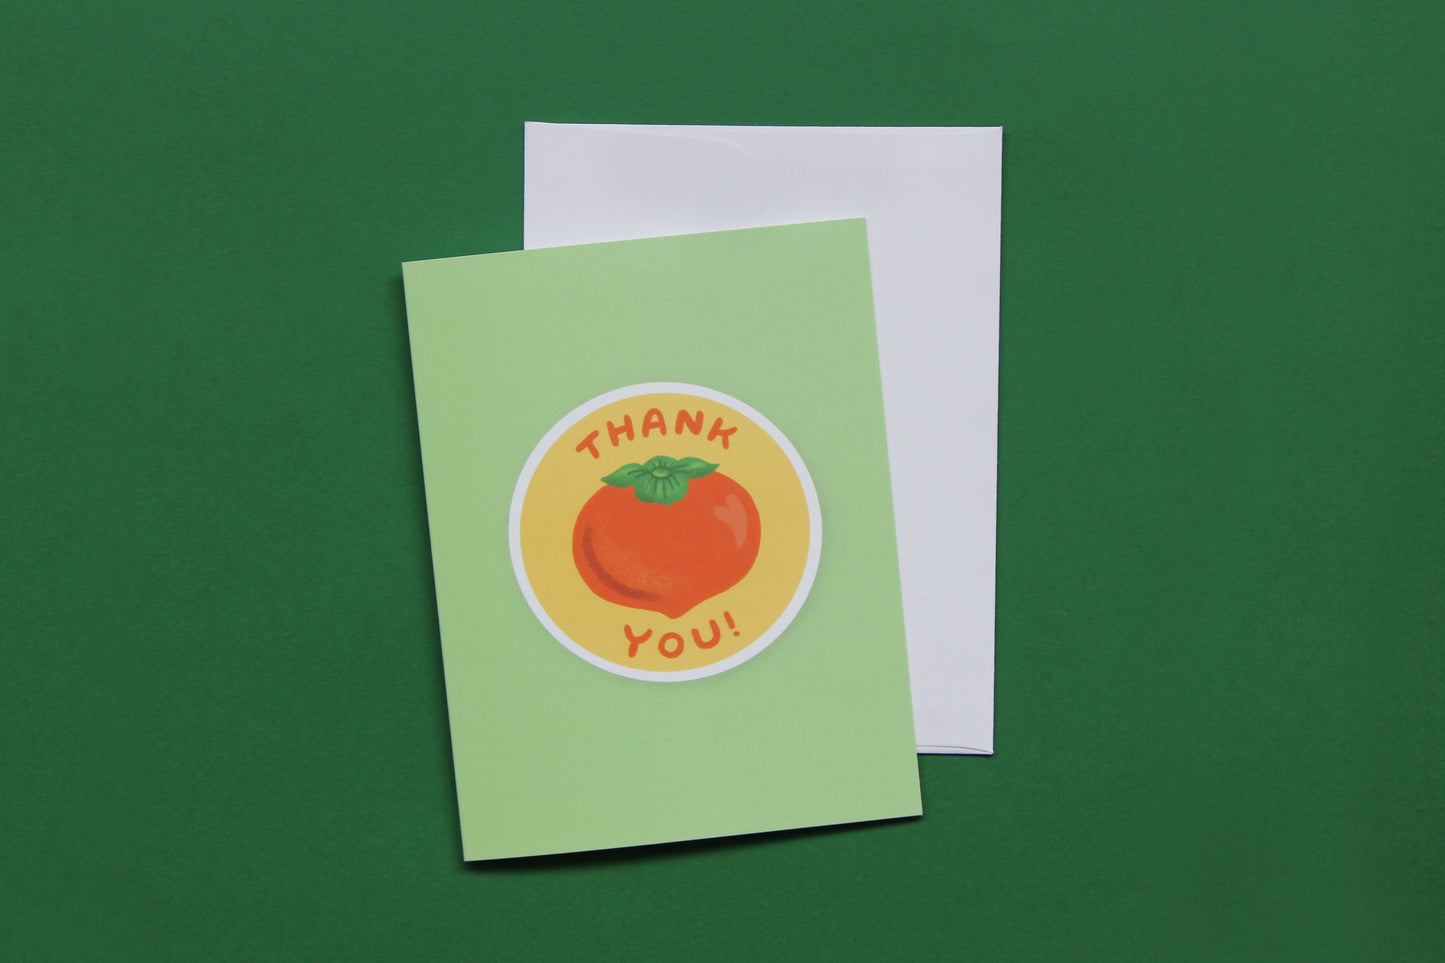 A photo of a green greeting card with a persimmon that says "Thank you" and a white envelope on a green background.